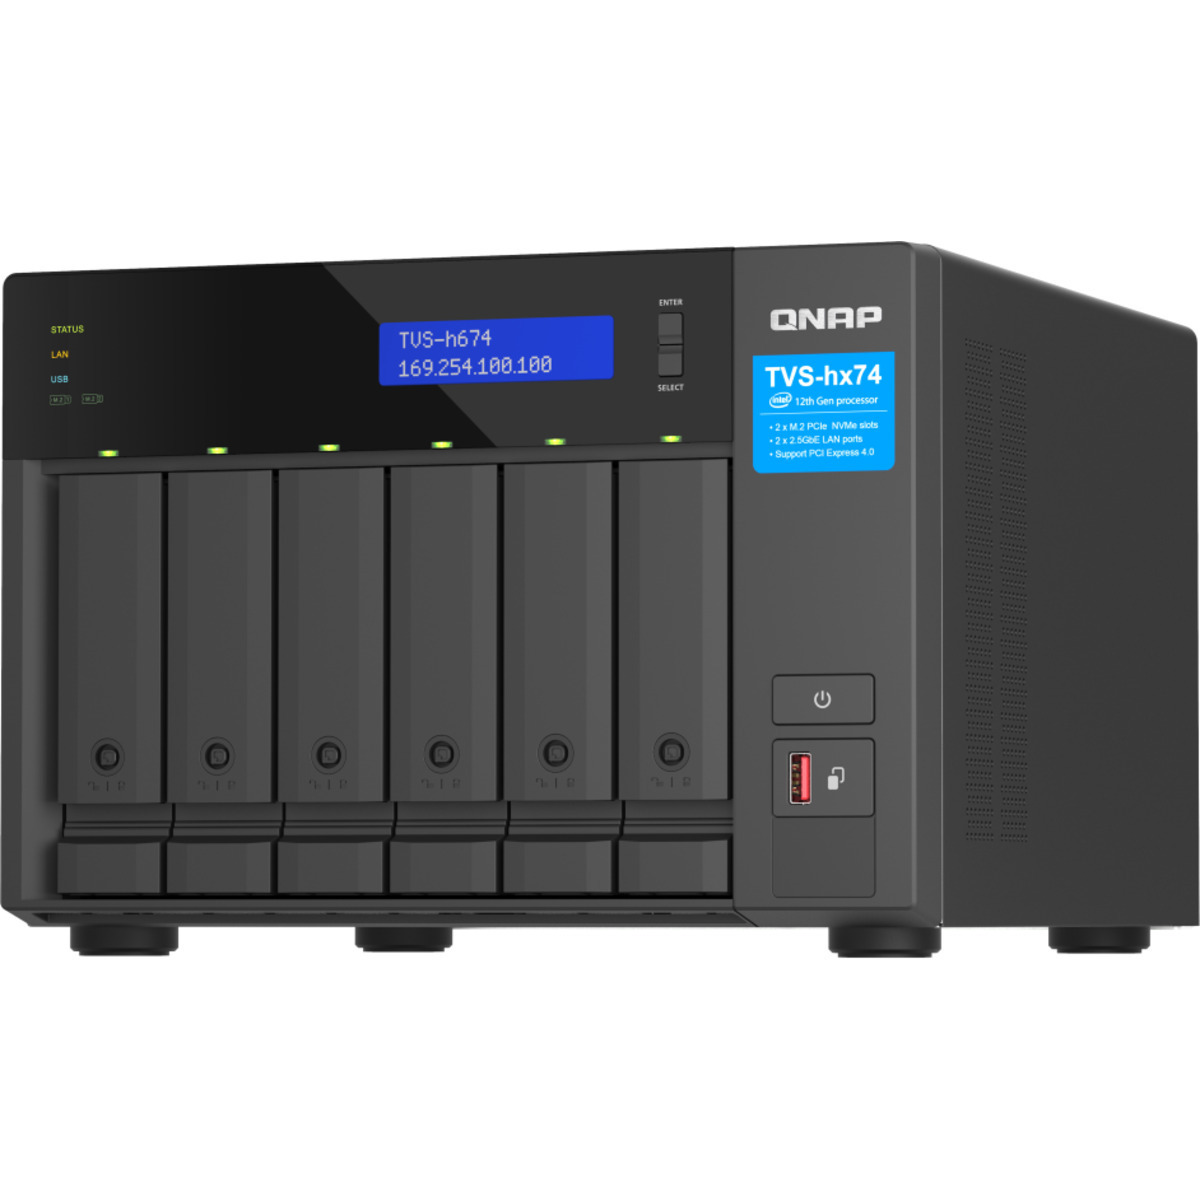 QNAP TVS-h674 Core i3 8tb 6-Bay Desktop Multimedia / Power User / Business NAS - Network Attached Storage Device 4x2tb Western Digital Red SA500 WDS200T1R0A 2.5 560/530MB/s SATA 6Gb/s SSD NAS Class Drives Installed - Burn-In Tested TVS-h674 Core i3